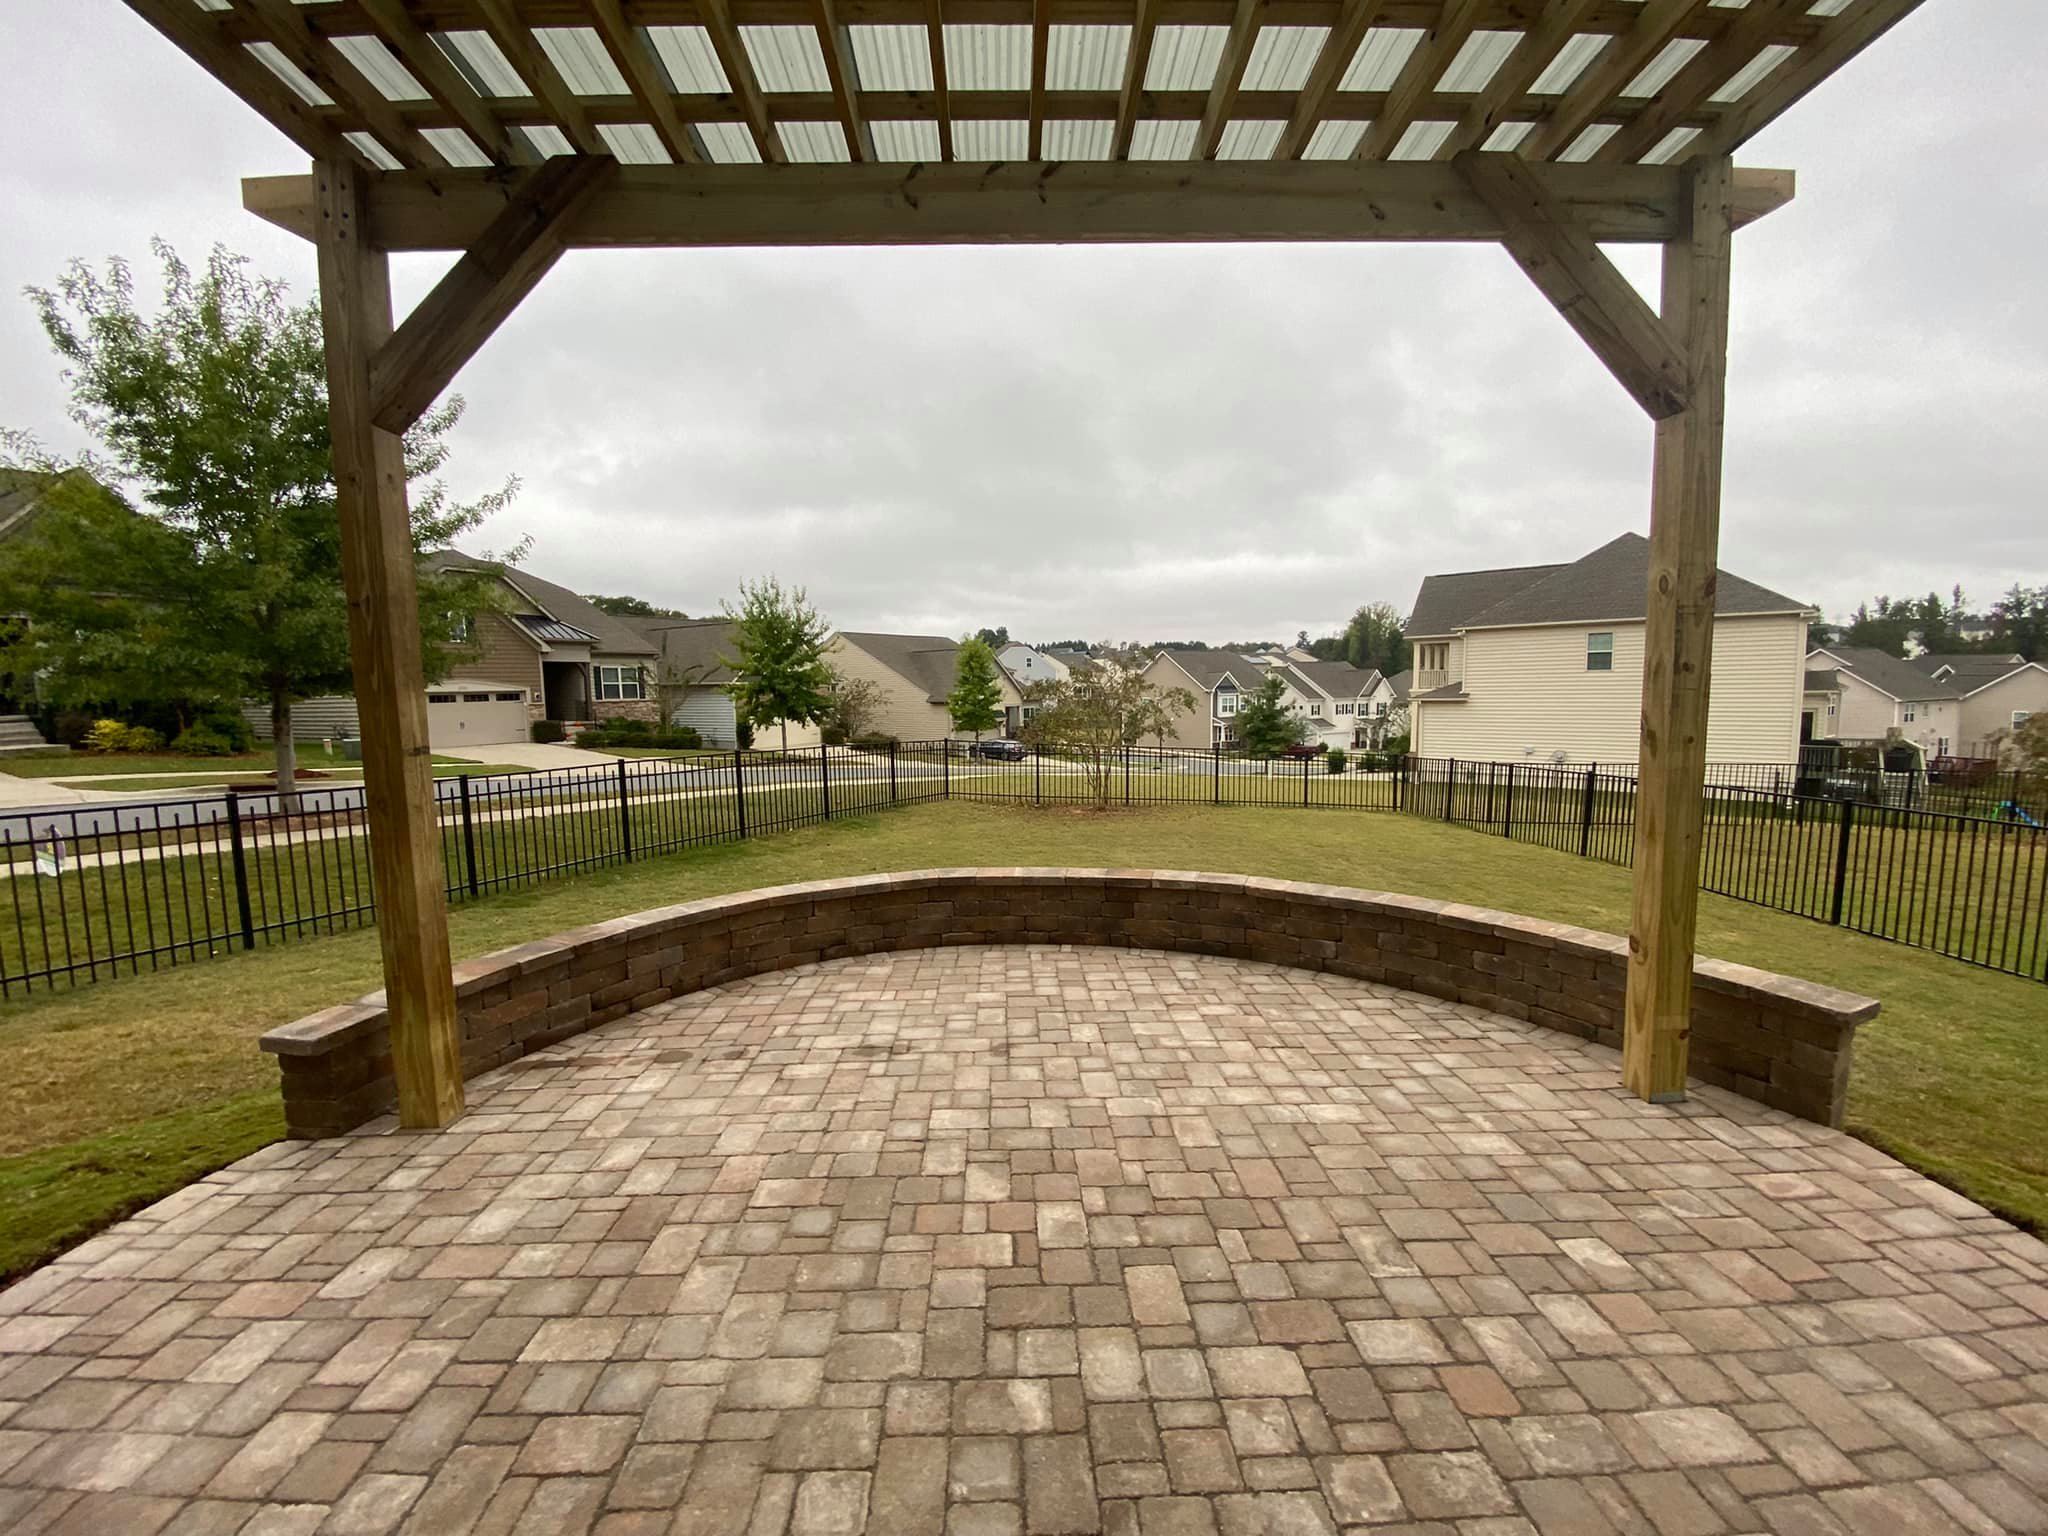 Paver Patio, Seating Wall and Covered Pergola – Outdoor Living Tip of the Day